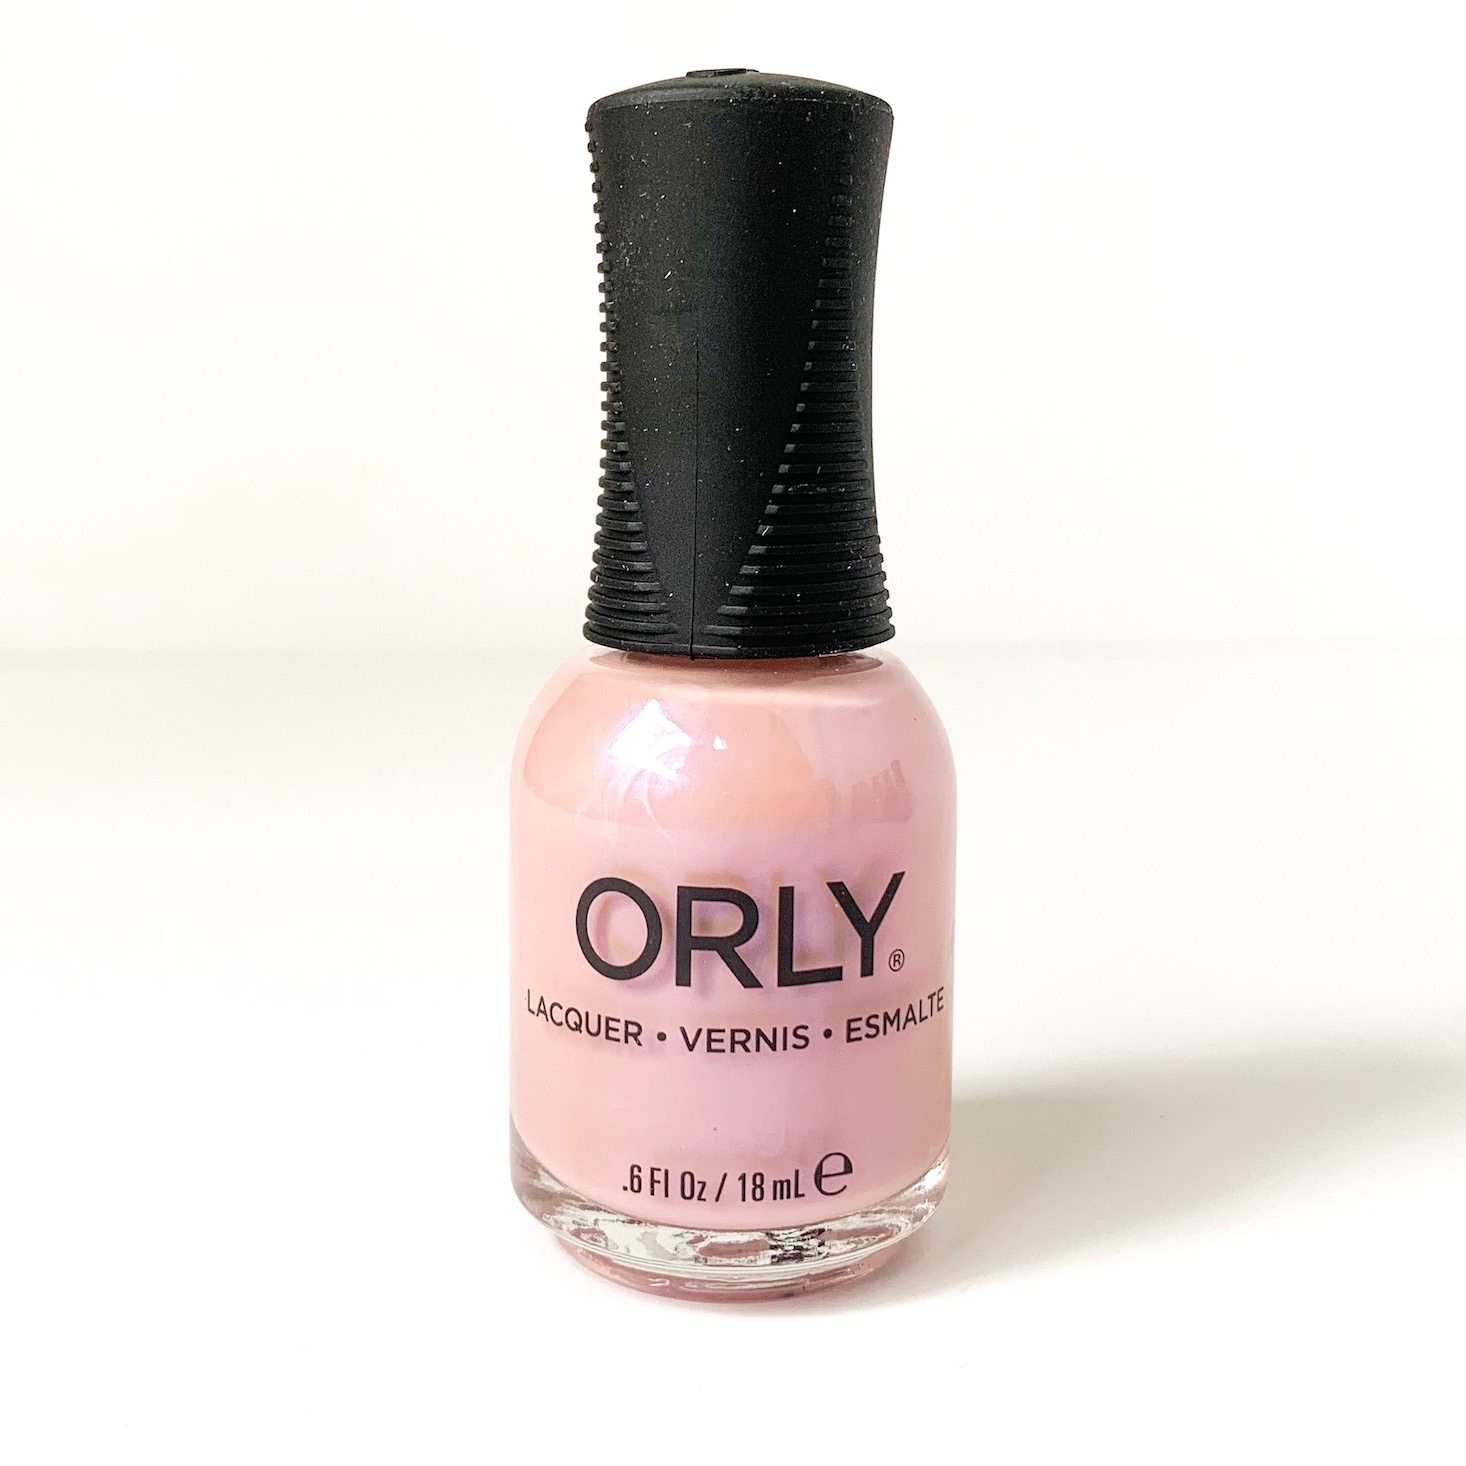 ORLY Color Pass Review + Coupon - Fall 2019 | MSA